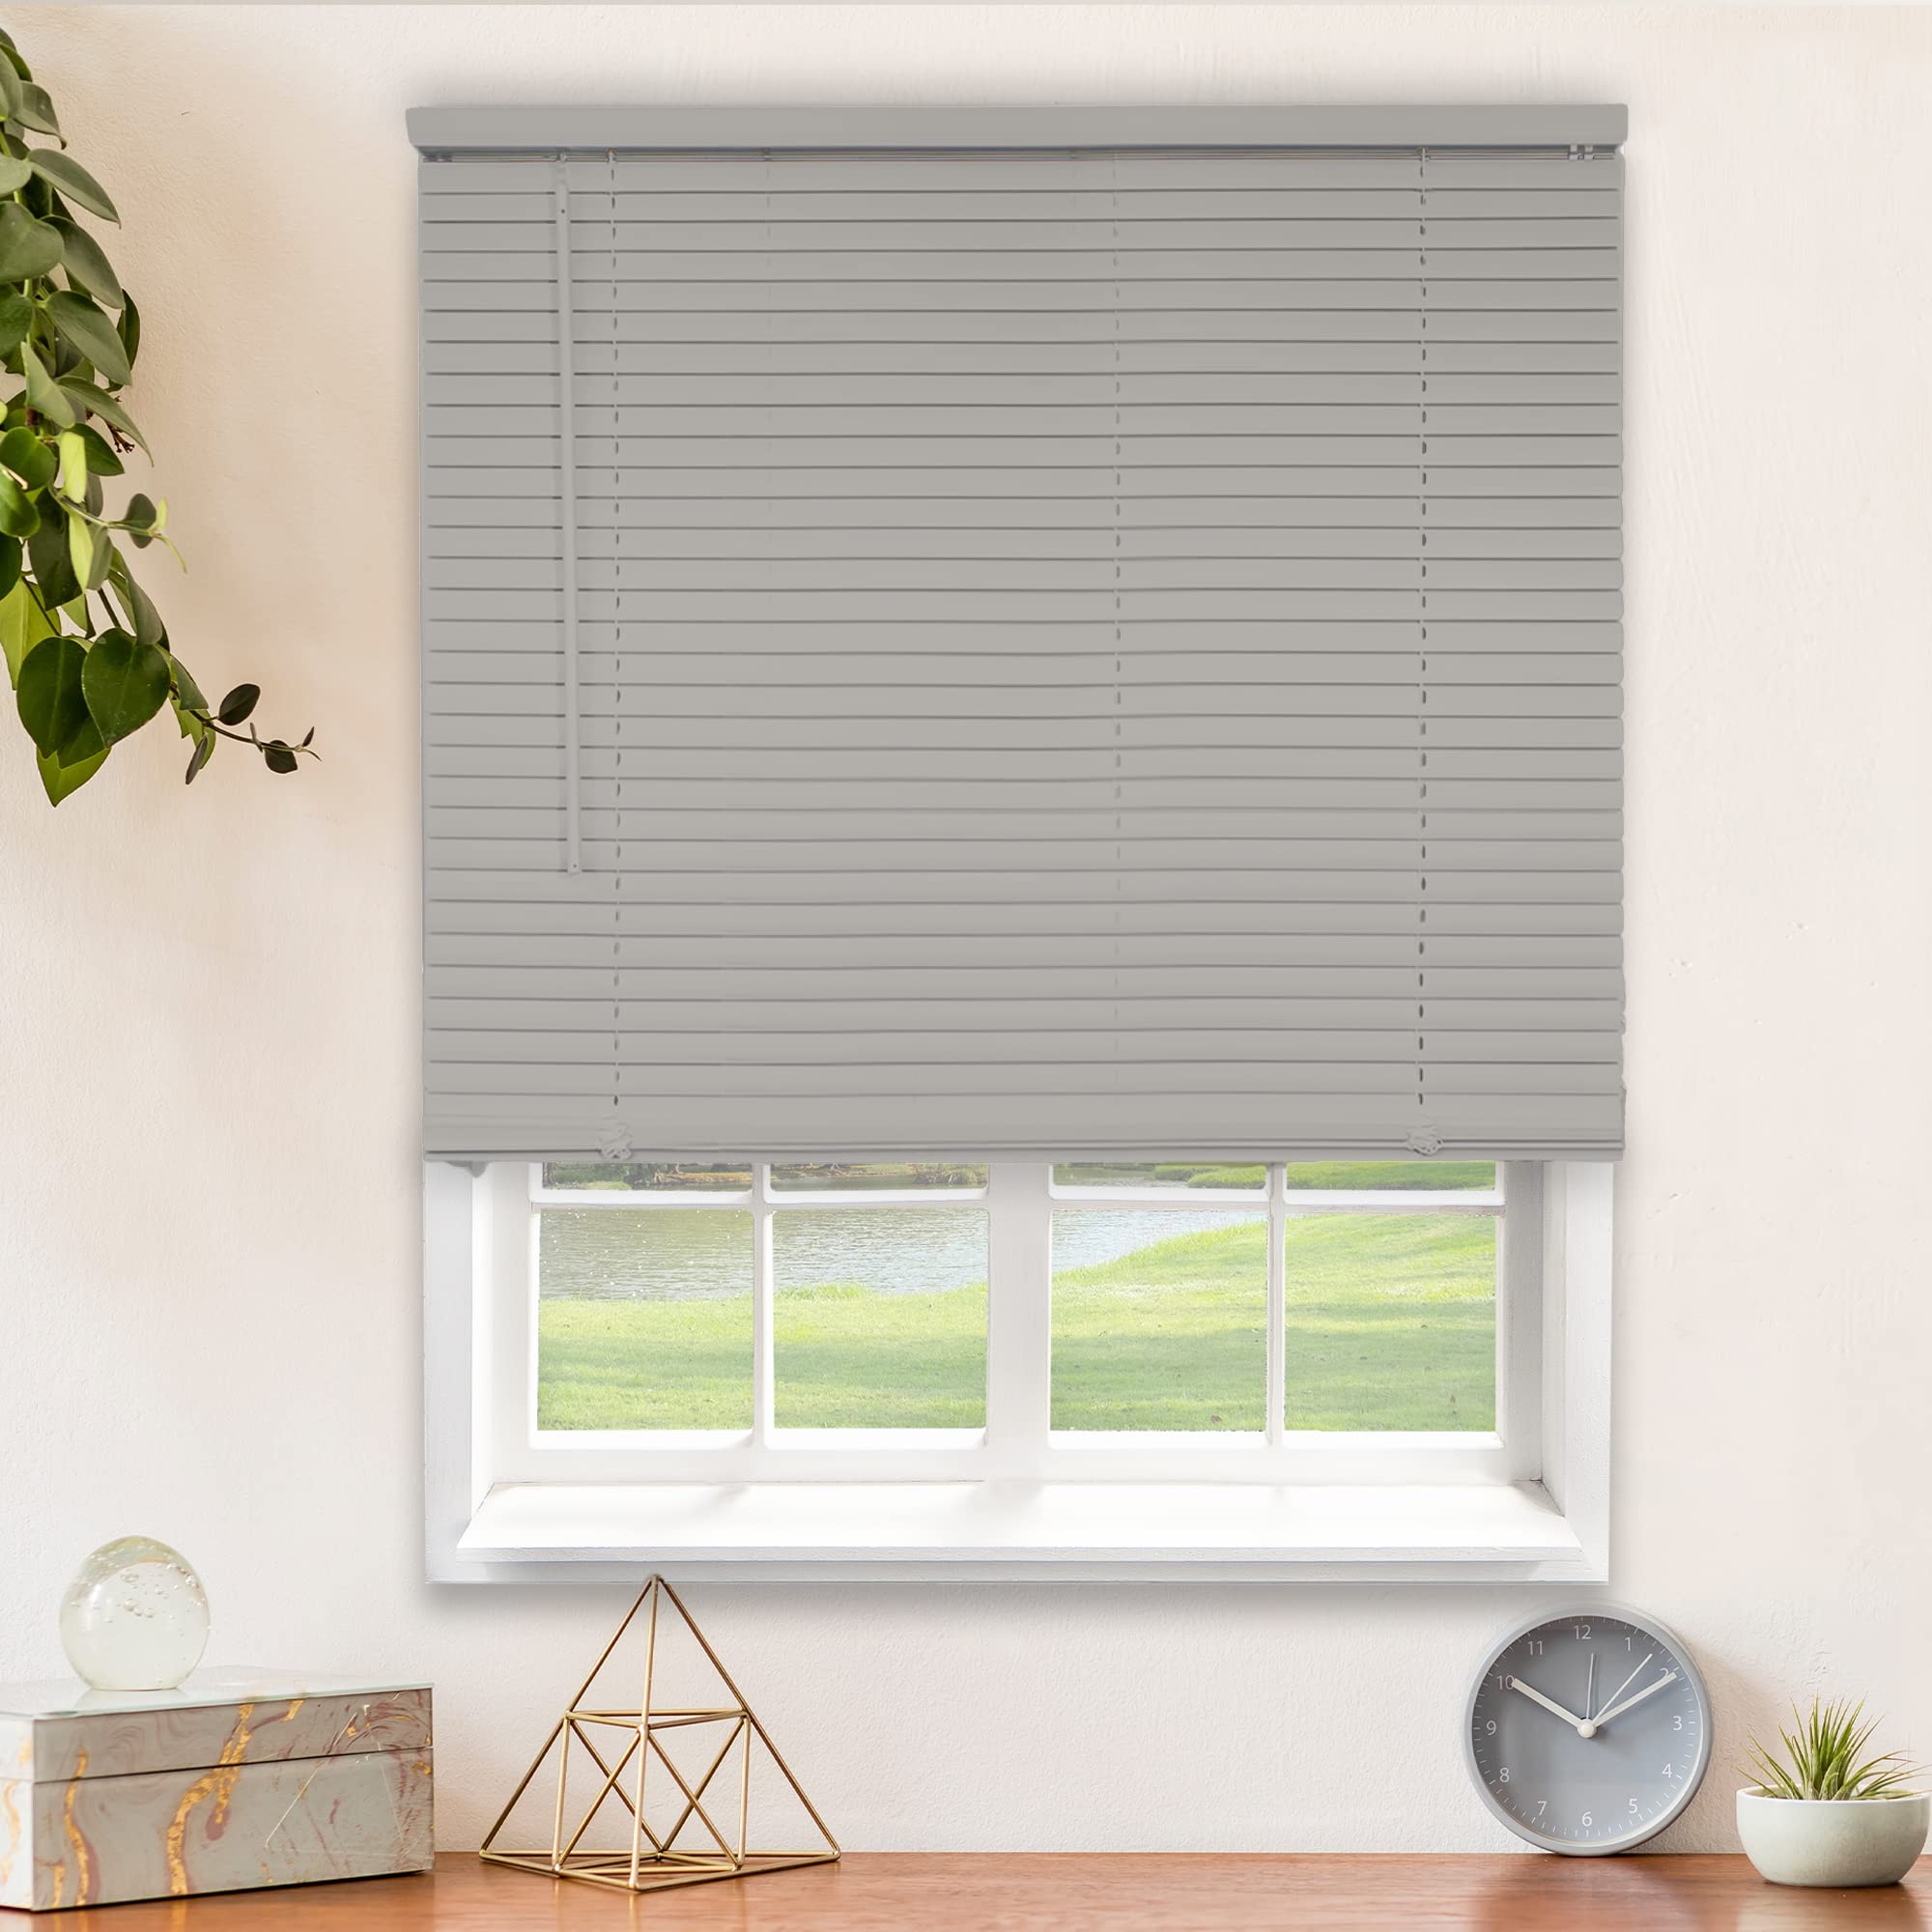 cHIcOLOgY Blinds for Windows , Mini Blinds , Window Blinds , Door Blinds , Blinds & Shades , camper Blinds , Mini Blinds for Win